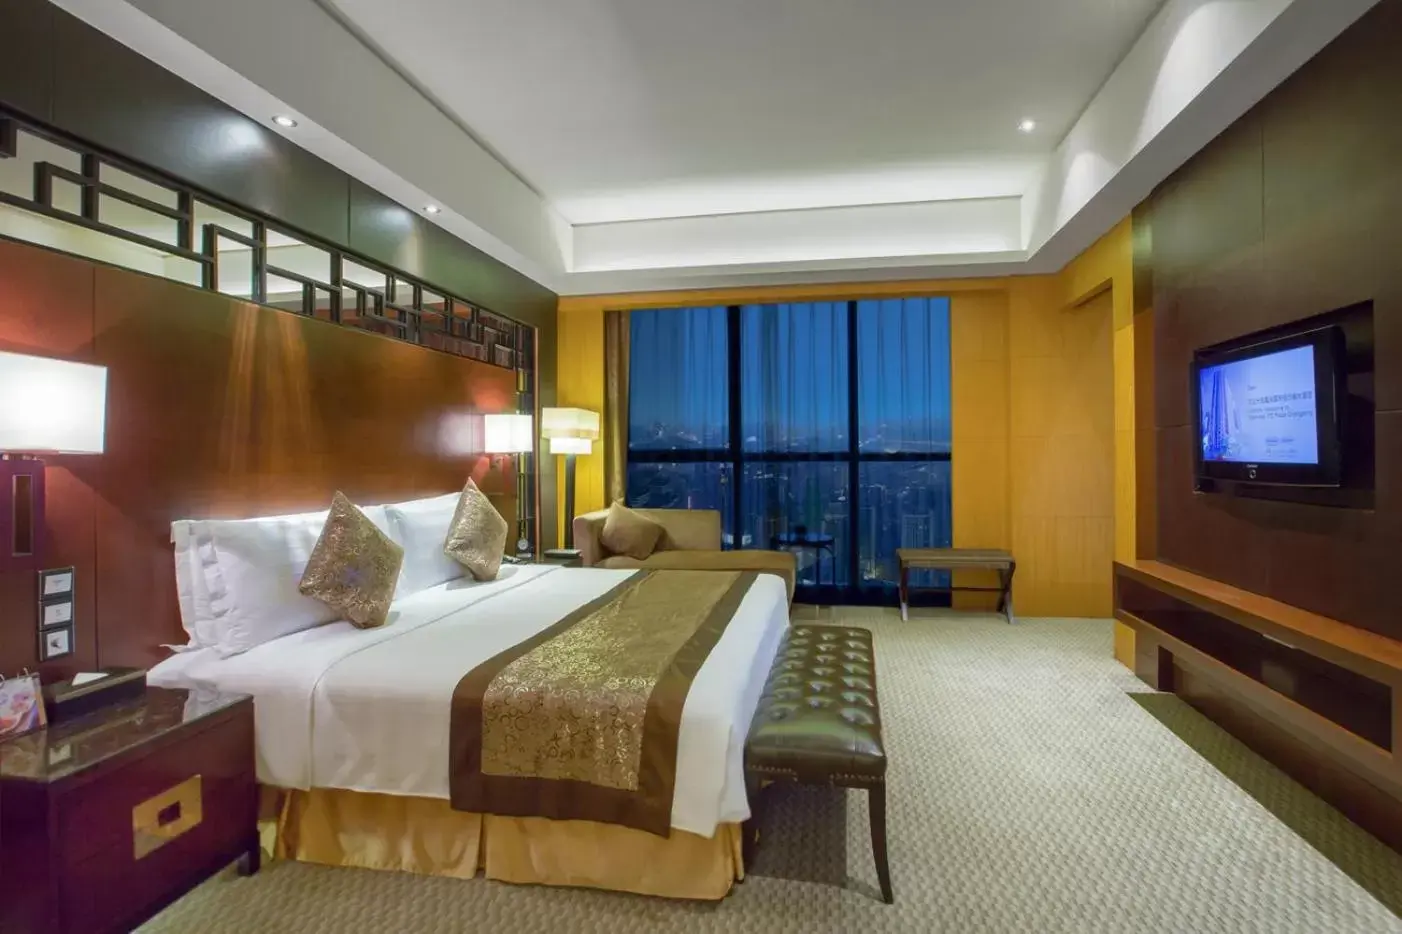 Bedroom, Bed in Glenview ITC Plaza Chongqing